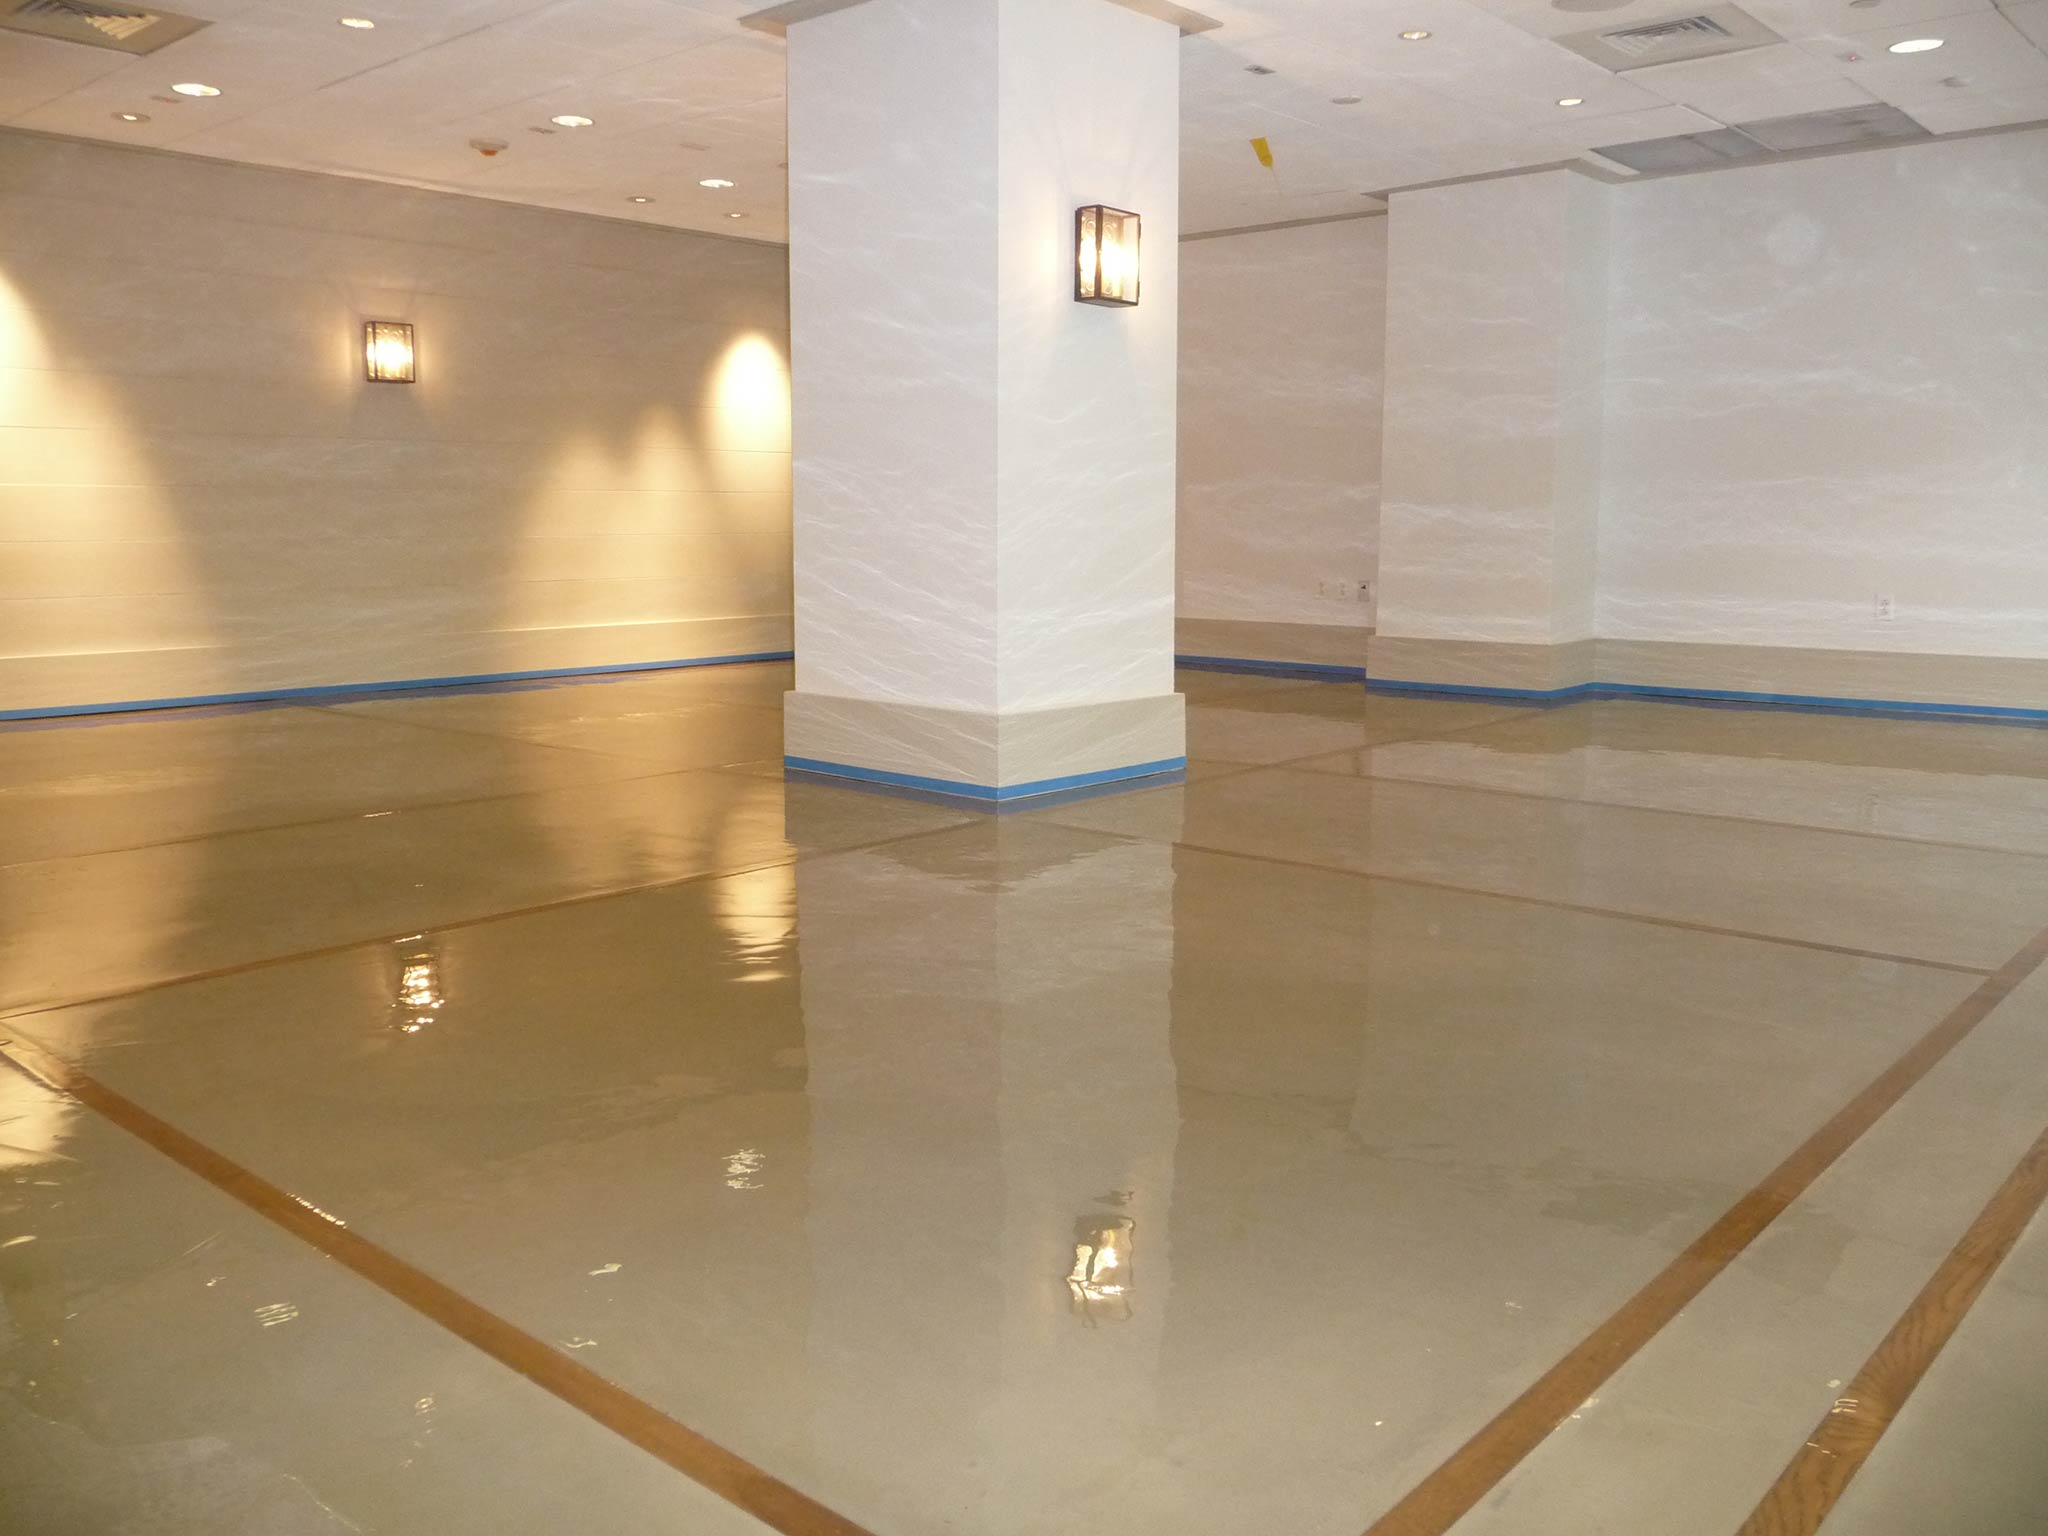 How to Install Self leveling Epoxy over Concrete Floorsfro Contractors and DIYers | Duraamen Engineered Products Inc